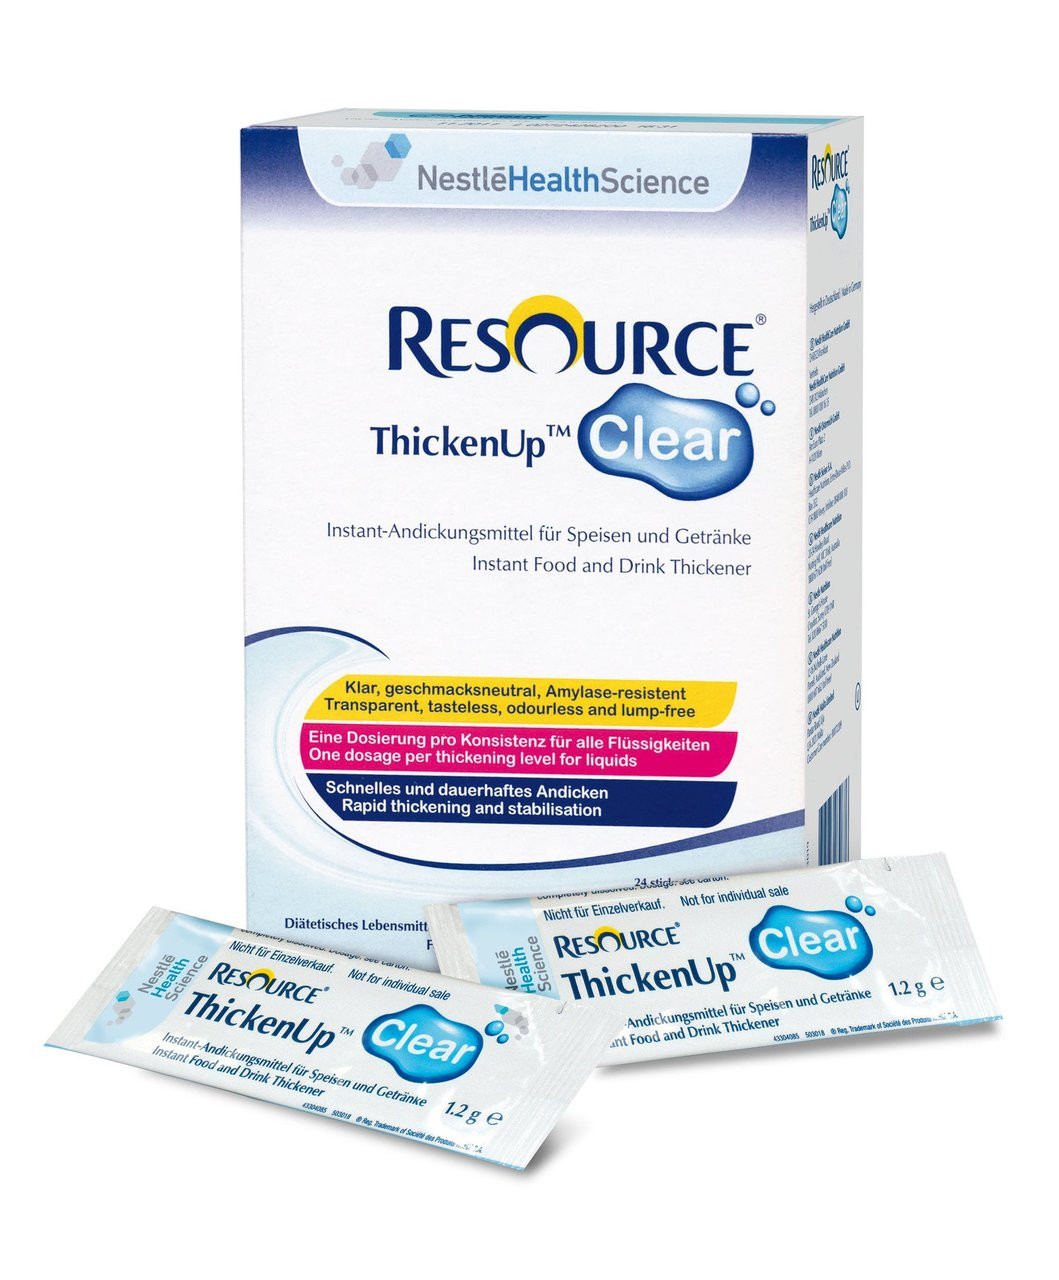 Nestle 12138489 Resource ThickenUp Clear 1.2g stick pack 288/Case NN12138489 (Nestle 12138489)